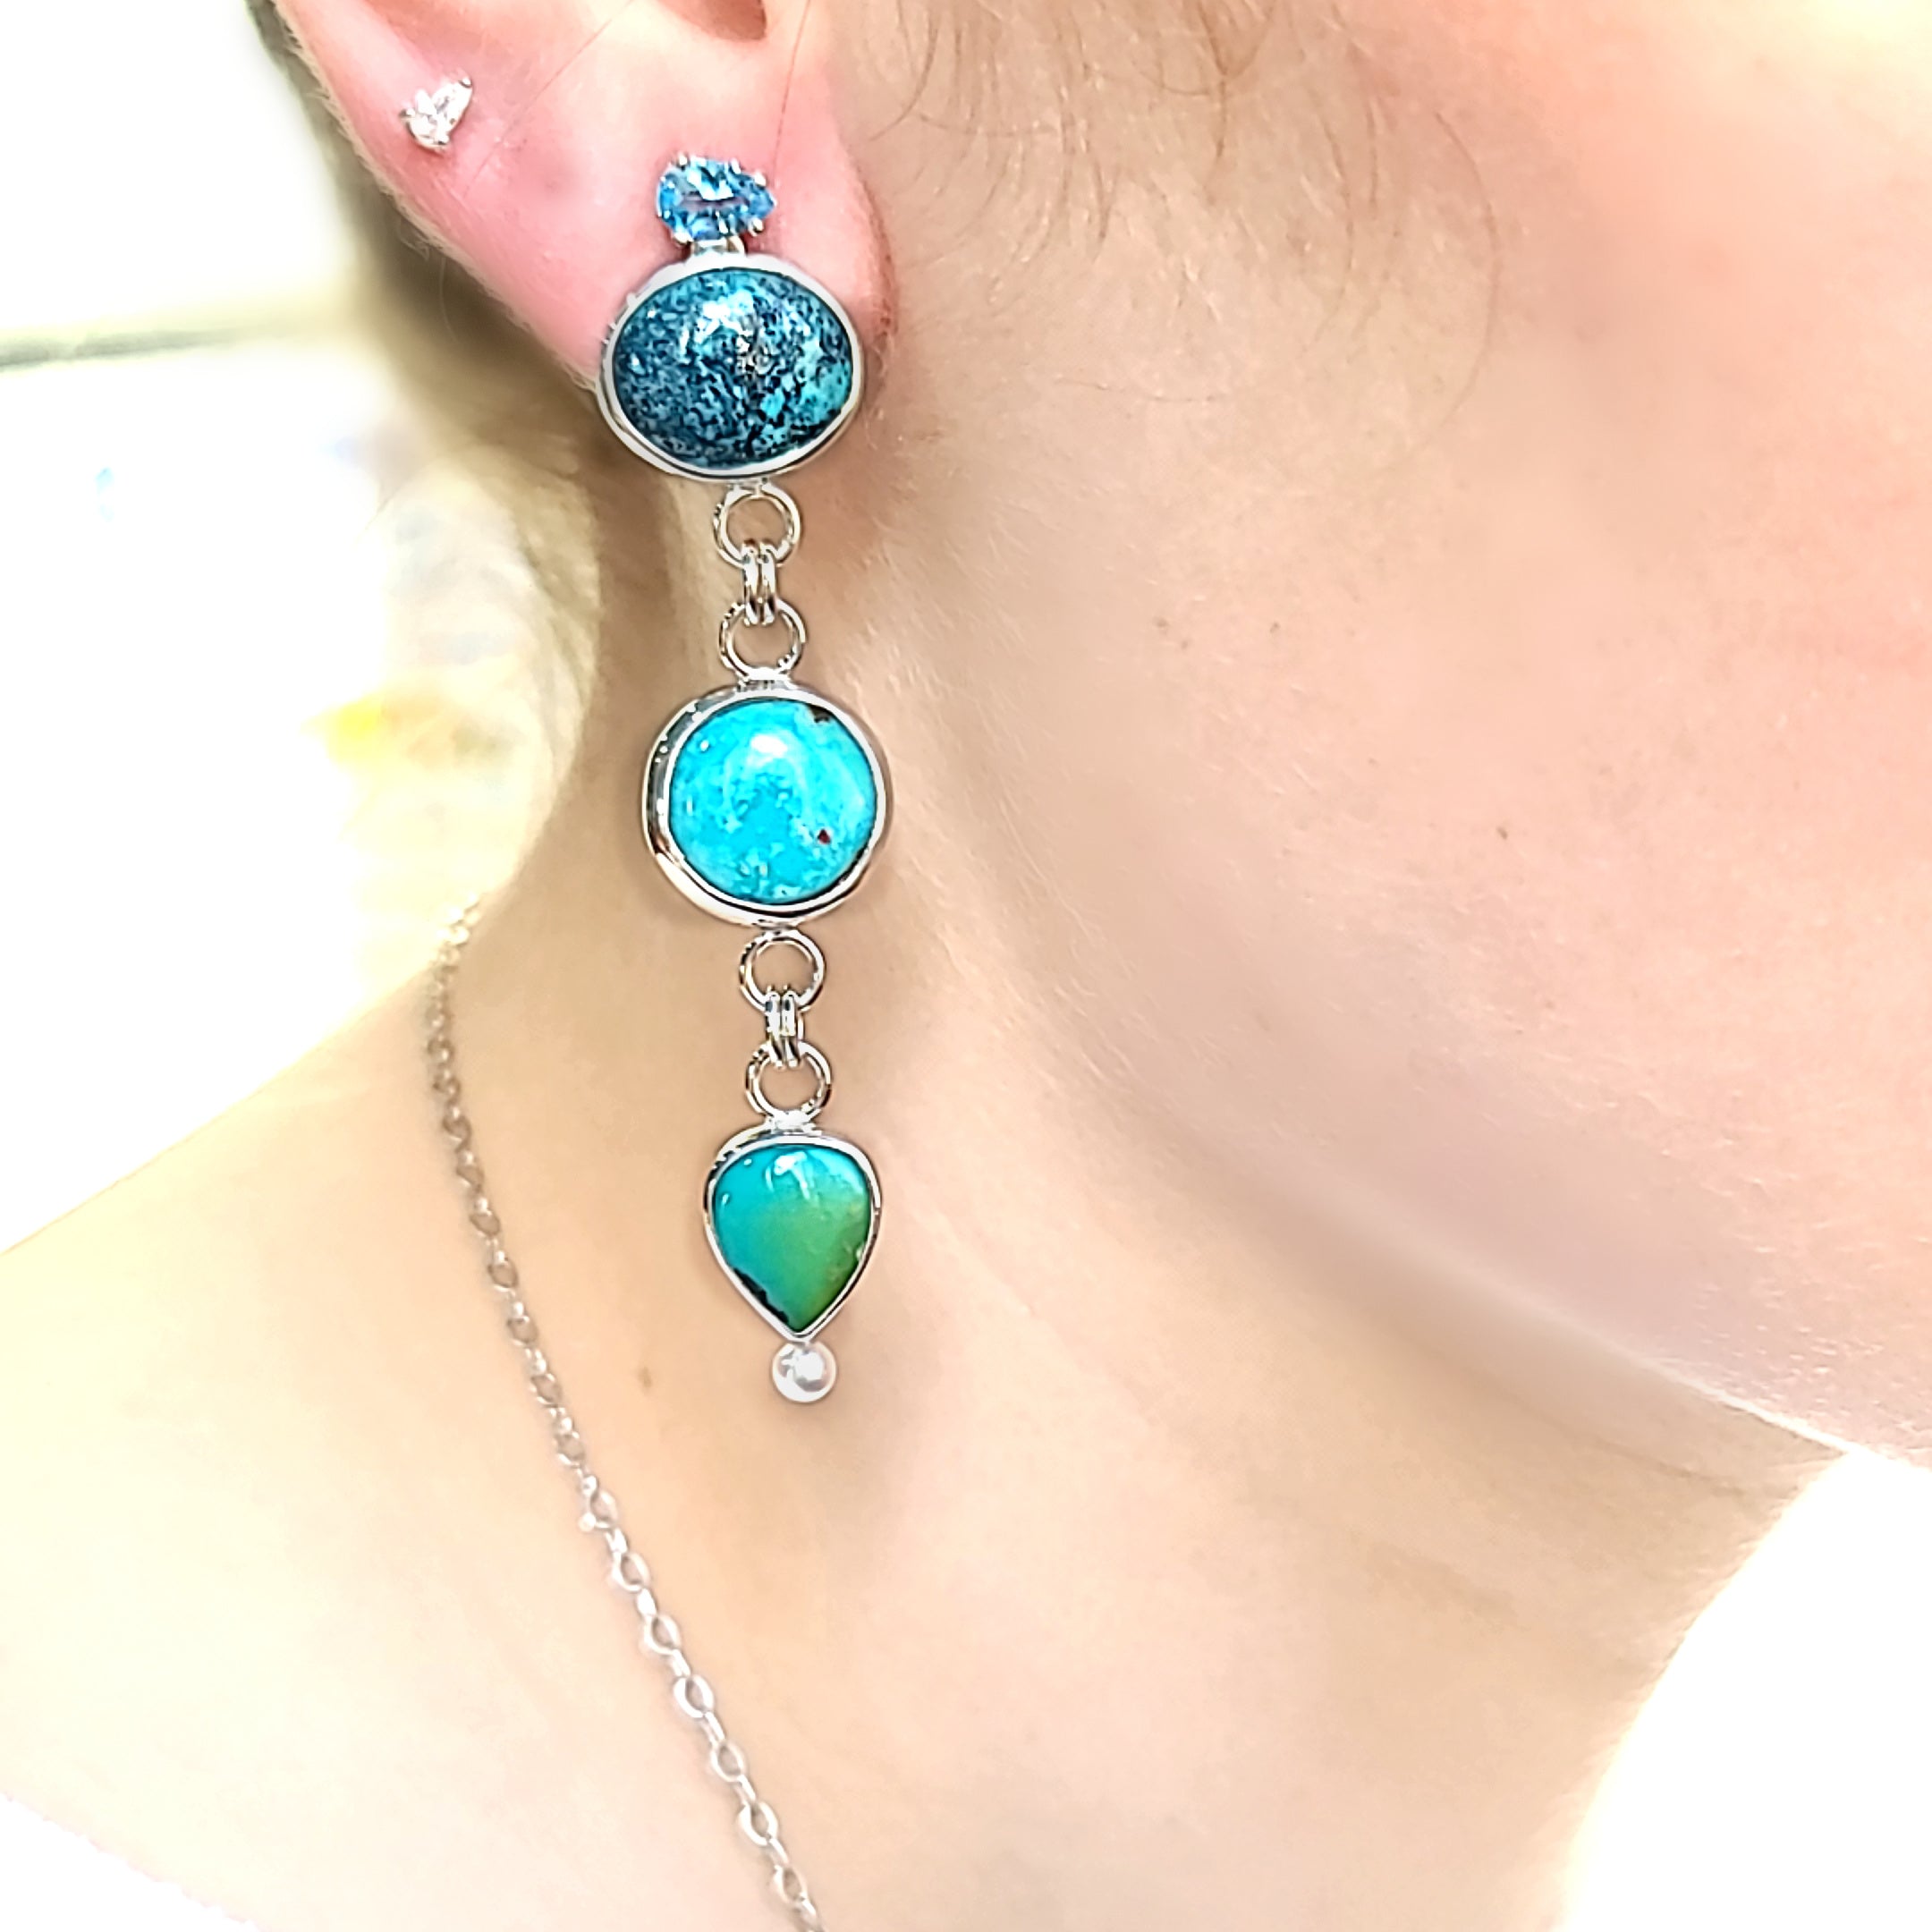 Model wearing Sterling Silver, Turquoise, Freshwater Pearls and Blue Topaz Earrings